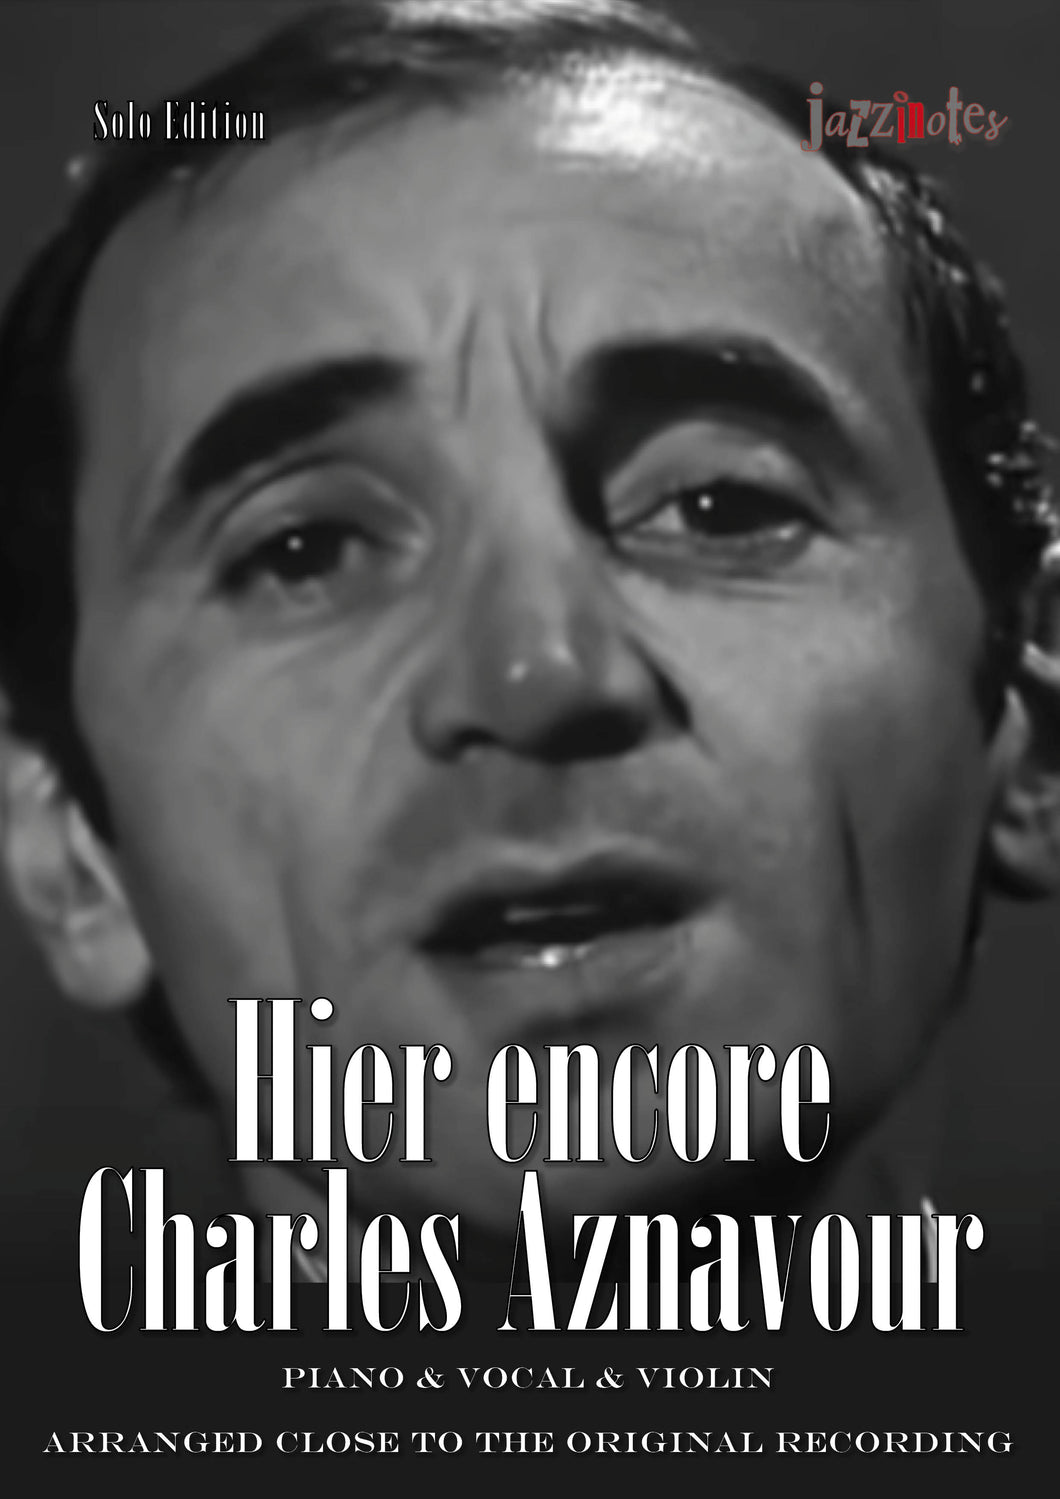 Aznavour, Charels: Hier encore - Sheet Music Download (Piano & Vocal & Violin)